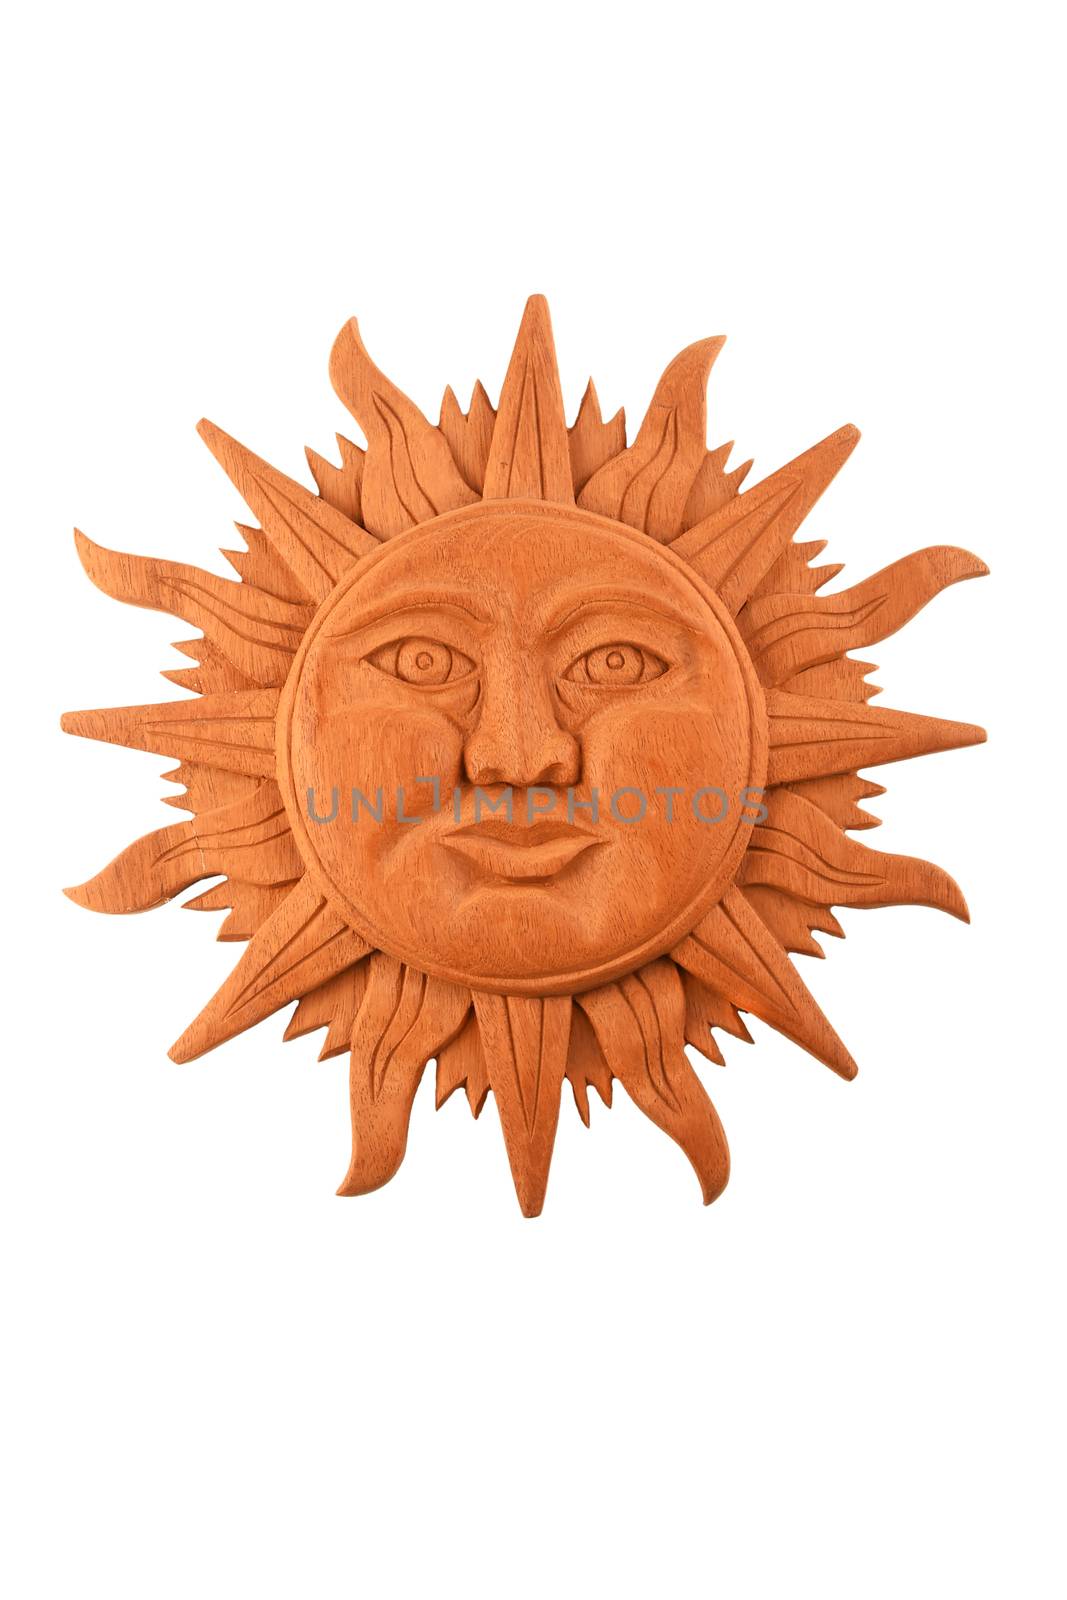 Mexican wooden carved Mayan sun symbol plate isolated on white by BreakingTheWalls